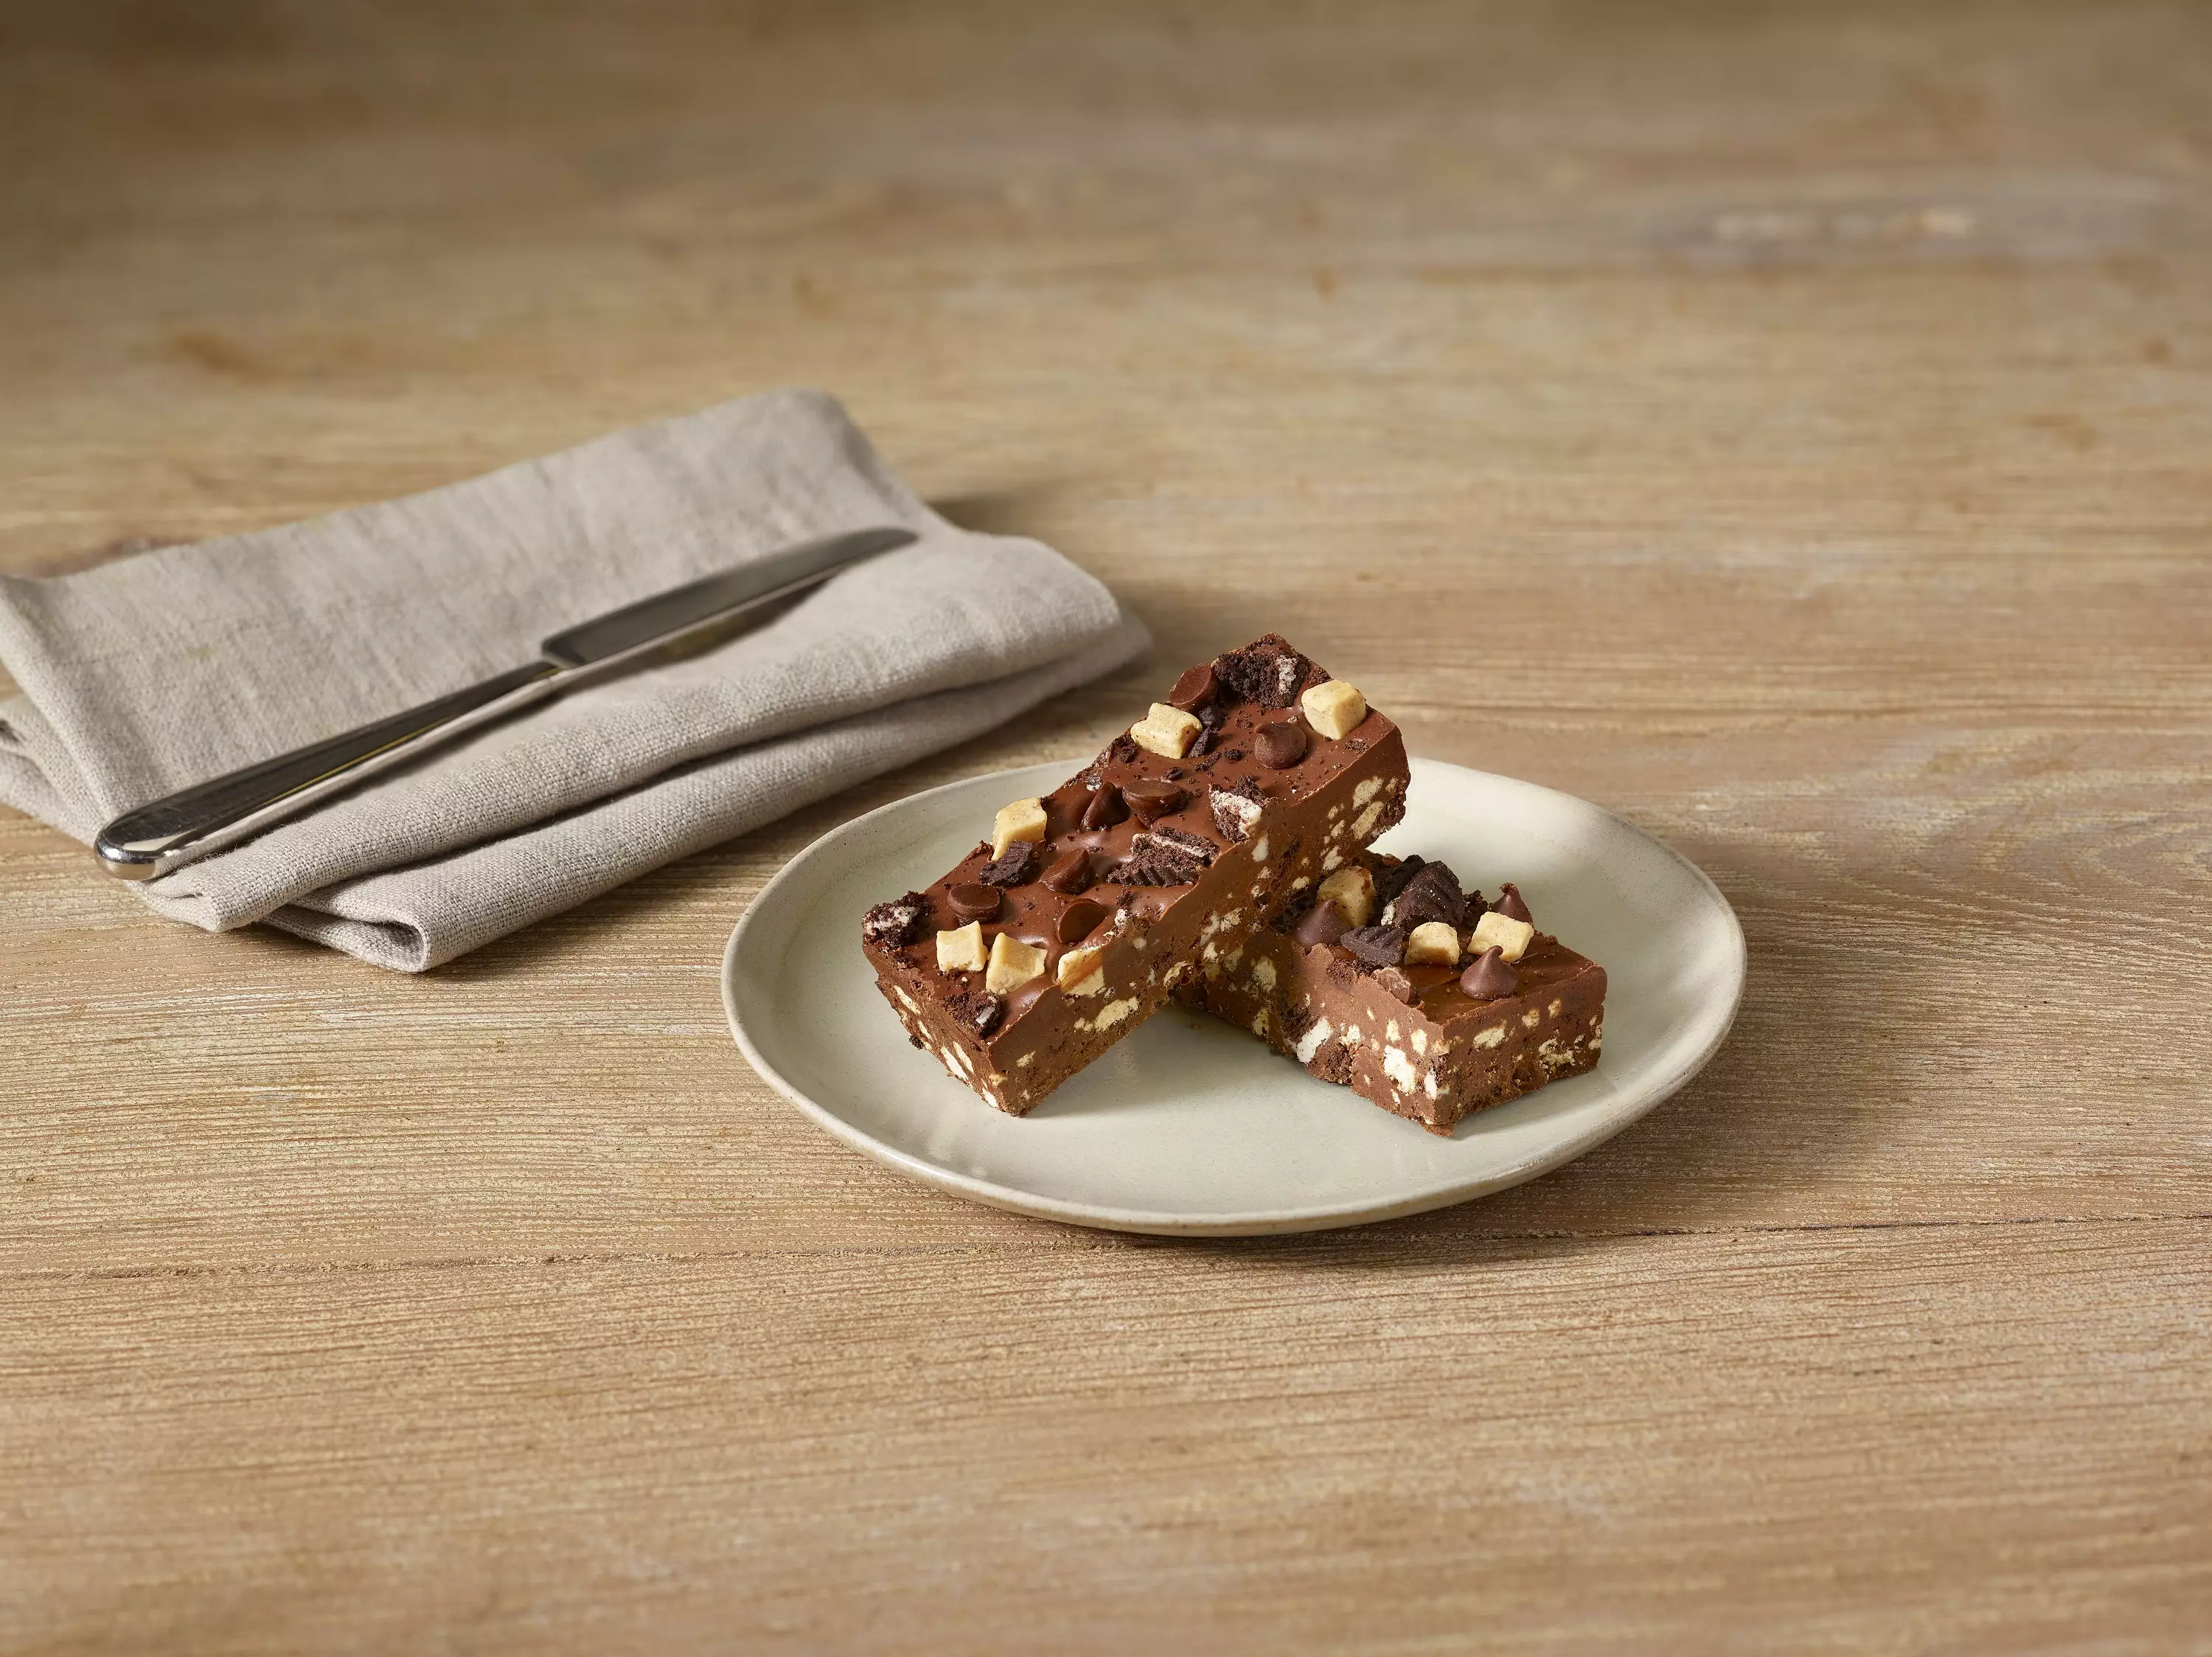 Costa has also teamed up with vegan recipe channel, BOSH! to create the new Ultimate Chocolate Slice (